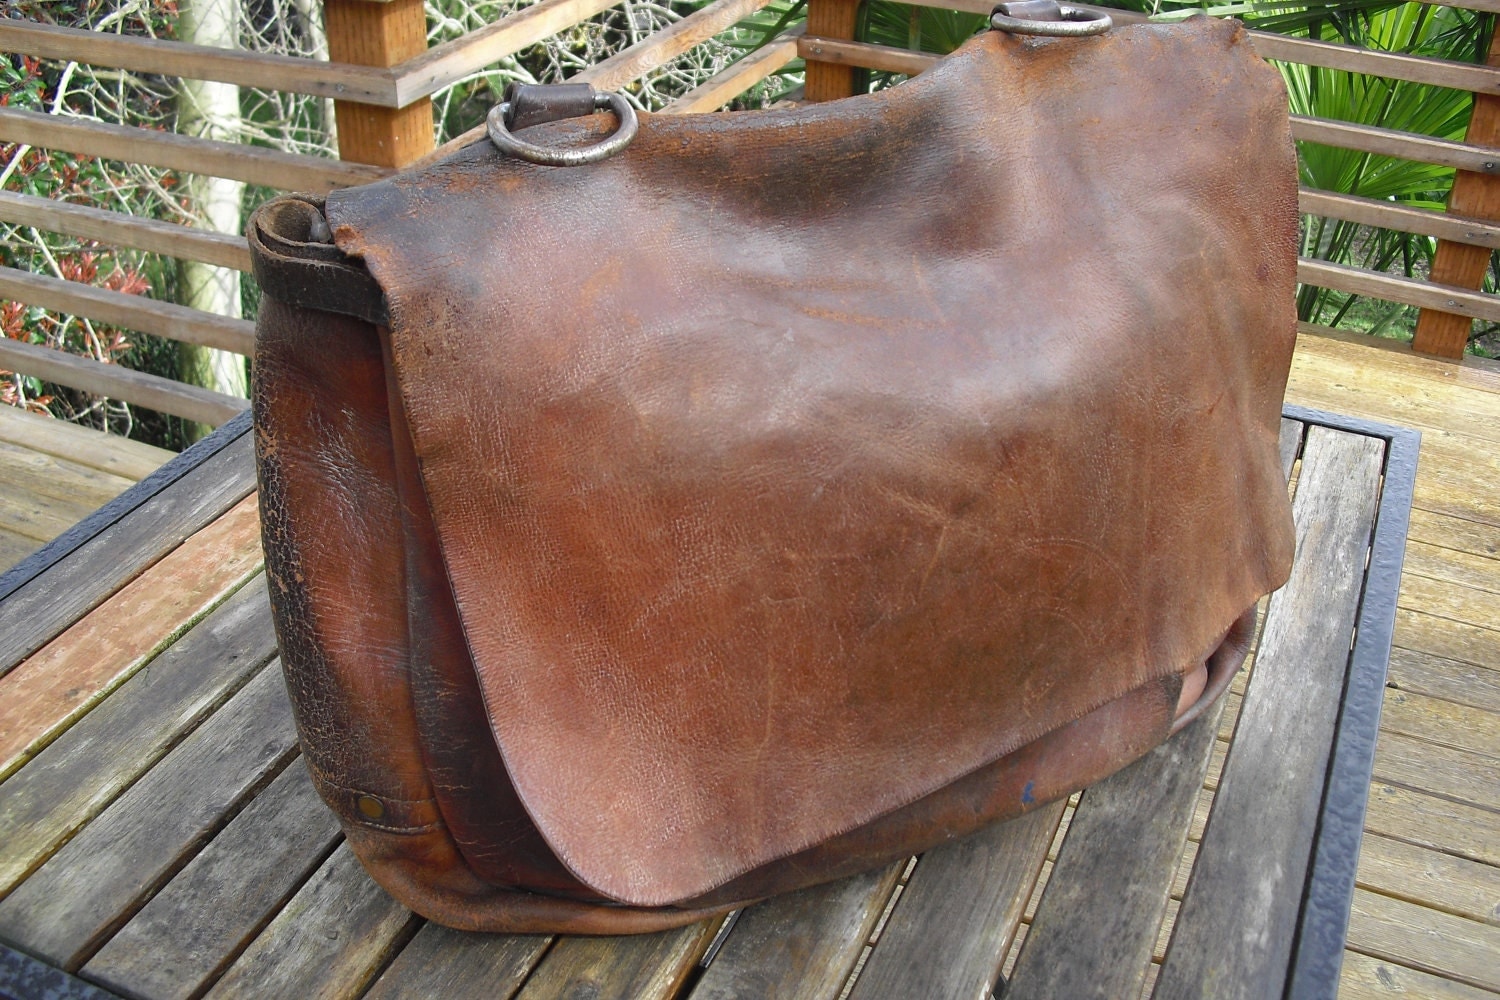 Authentic Vintage Leather US Mail Carrier Bag by dragonflyonbeacon